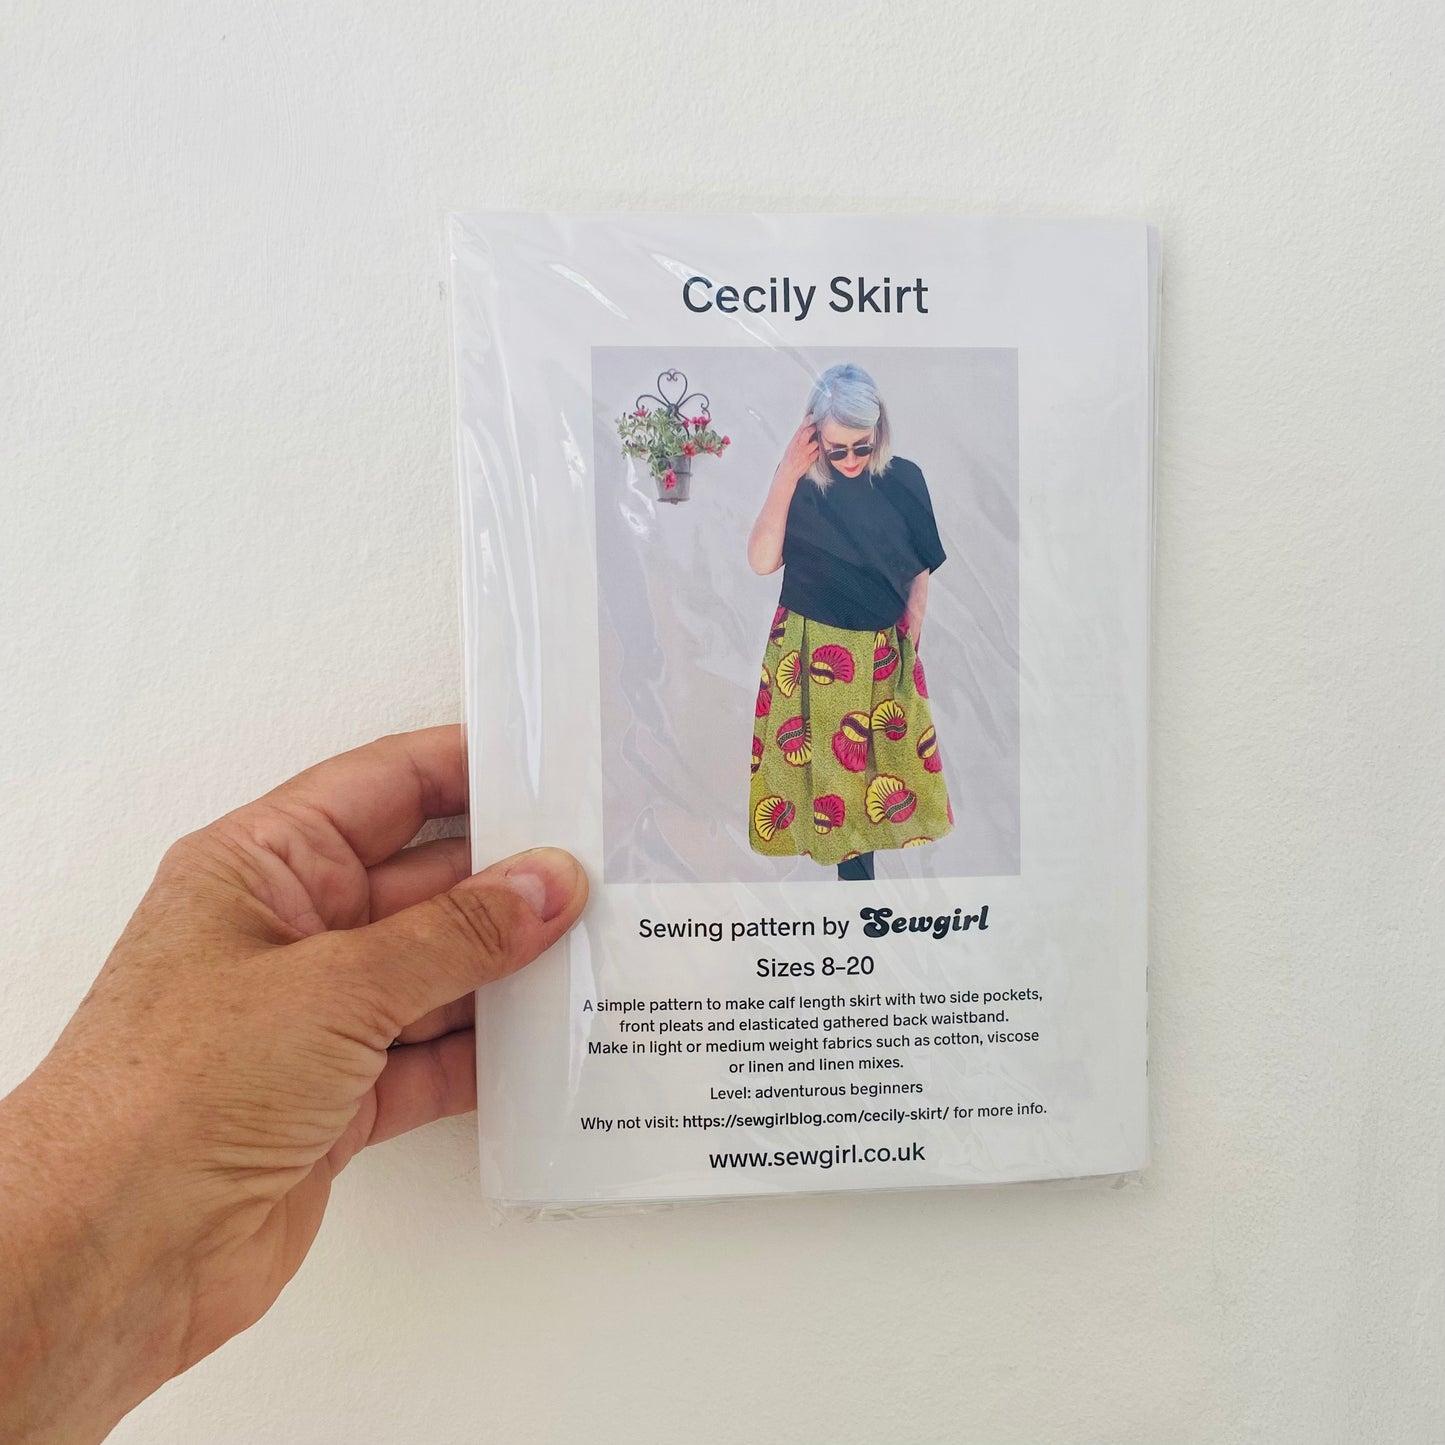 CECILY SKIRT sewing pattern